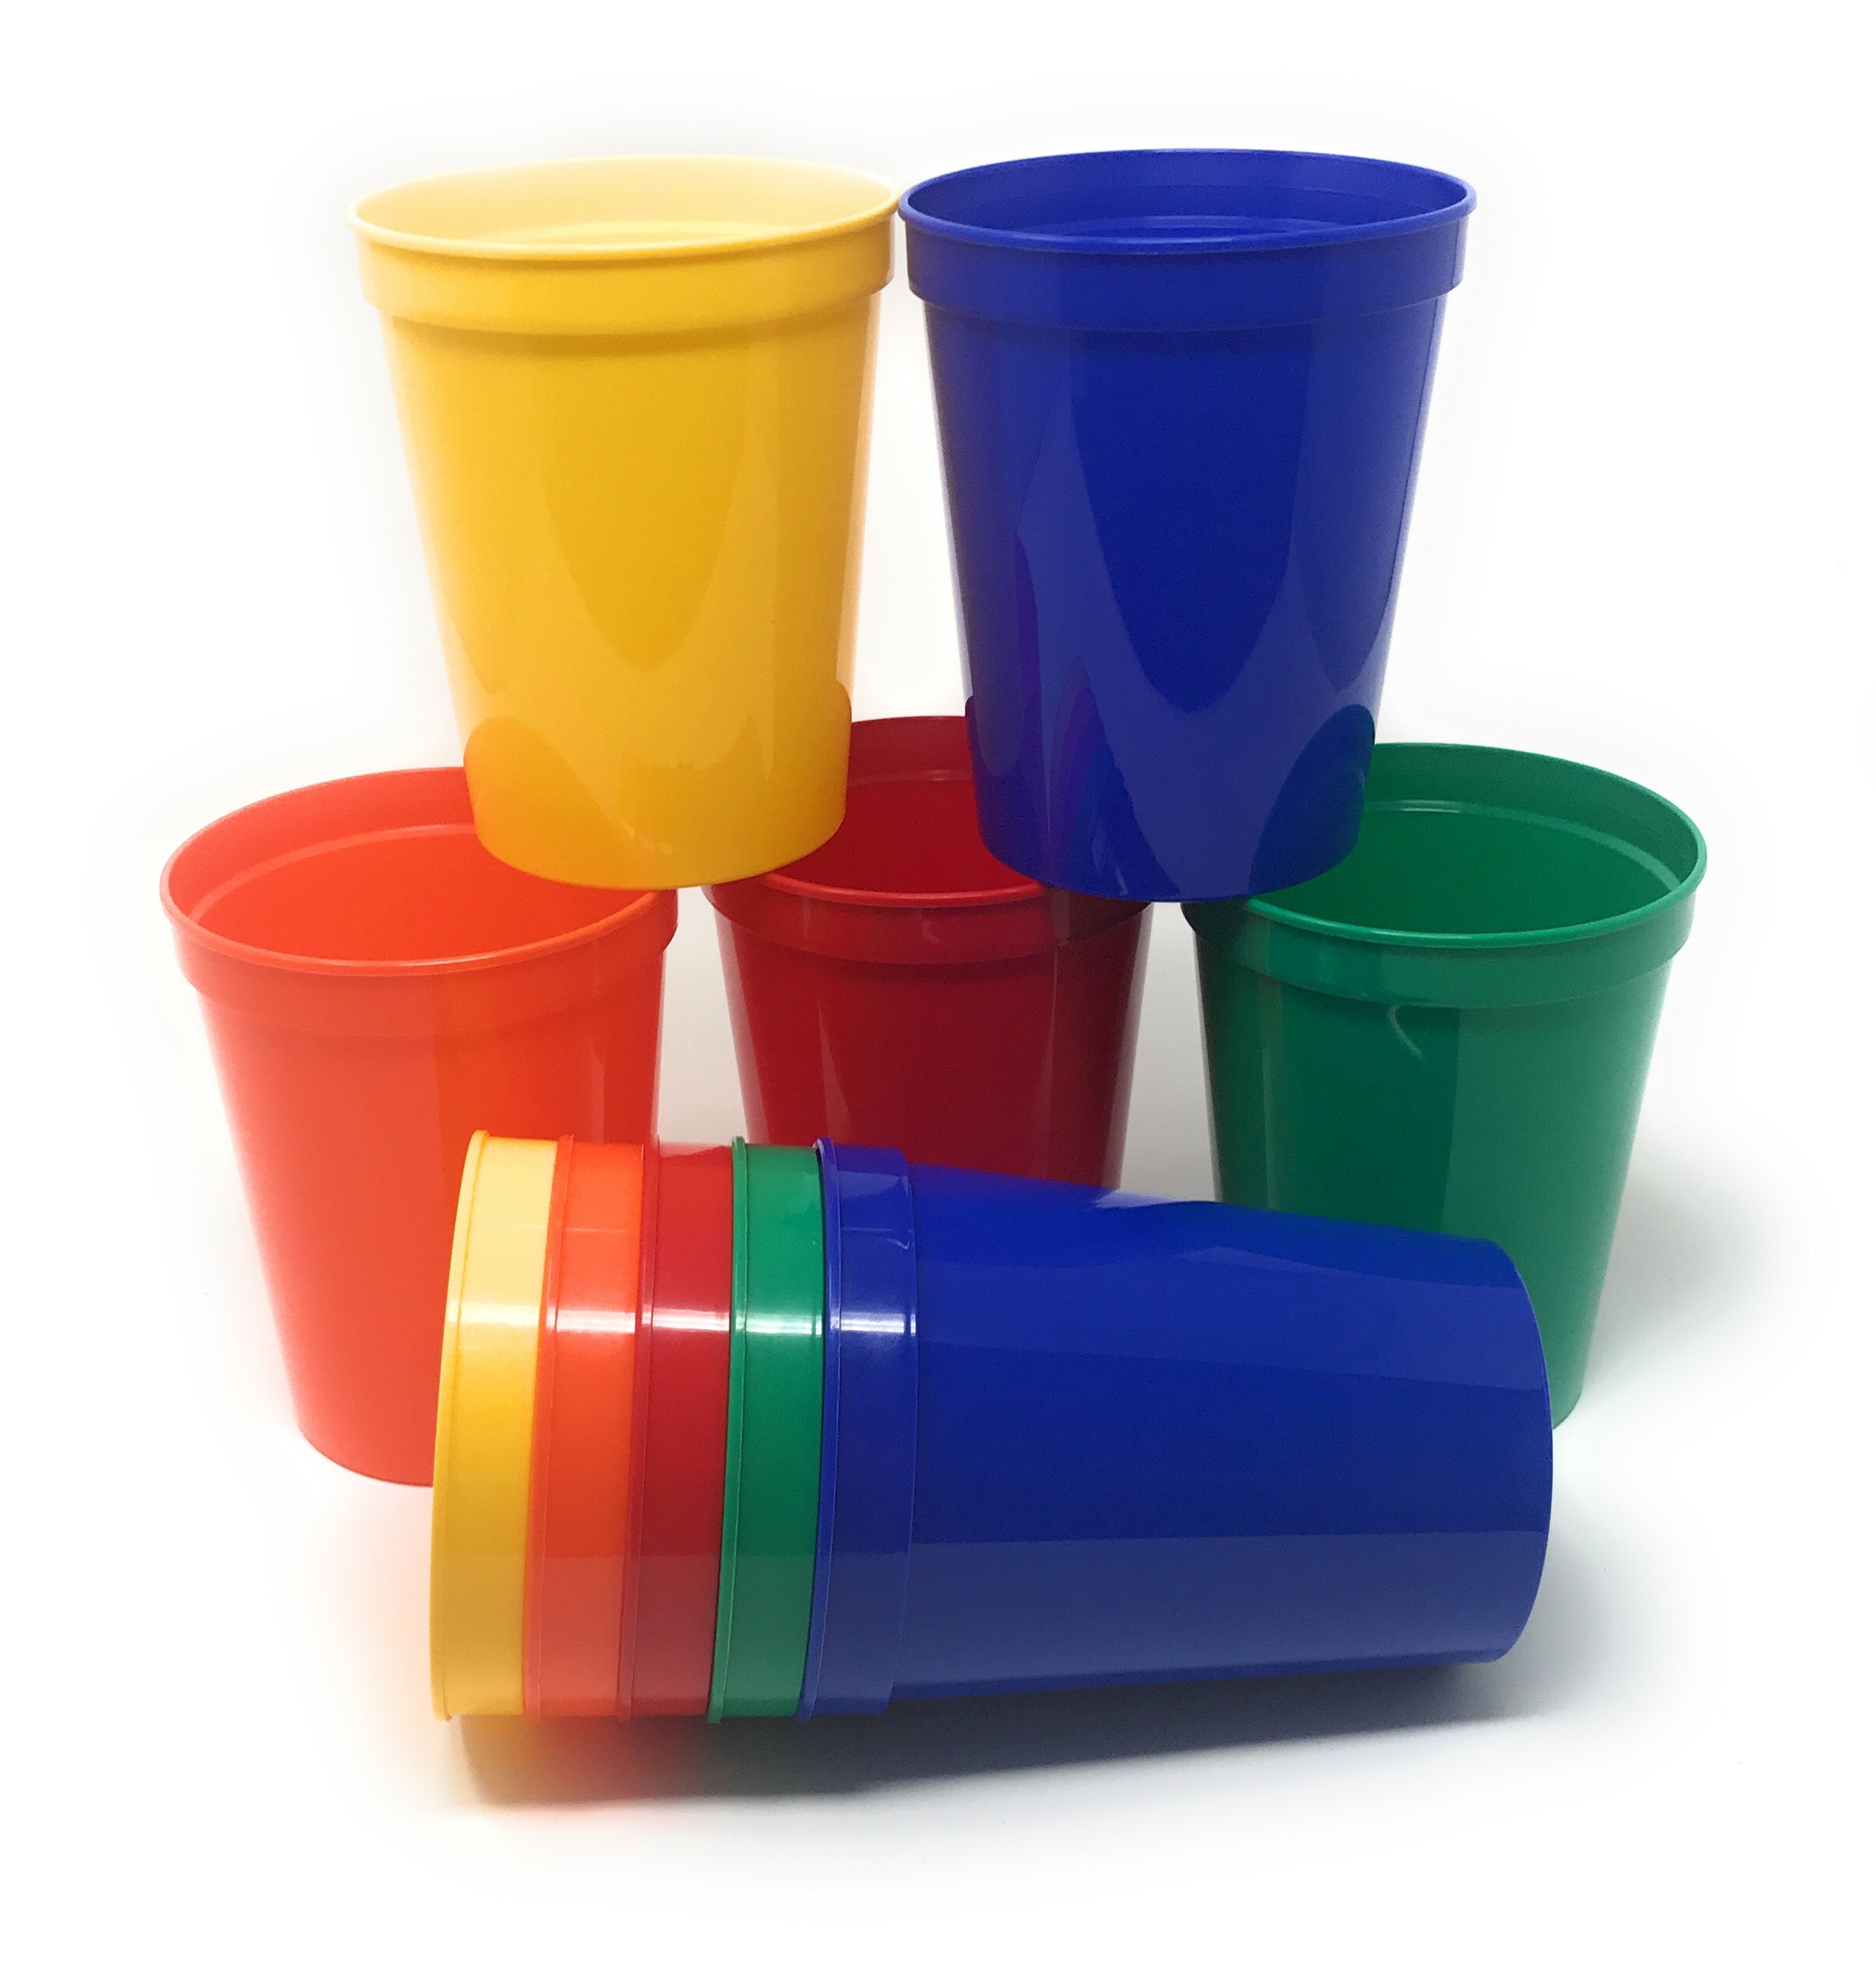  CSBD Stadium 12 oz. Plastic Cups, 10 Pack, Blank Reusable Drink  Tumblers for Parties, Events, Marketing, Weddings, DIY Projects or BBQ  Picnics, No BPA (Blue) : Health & Household